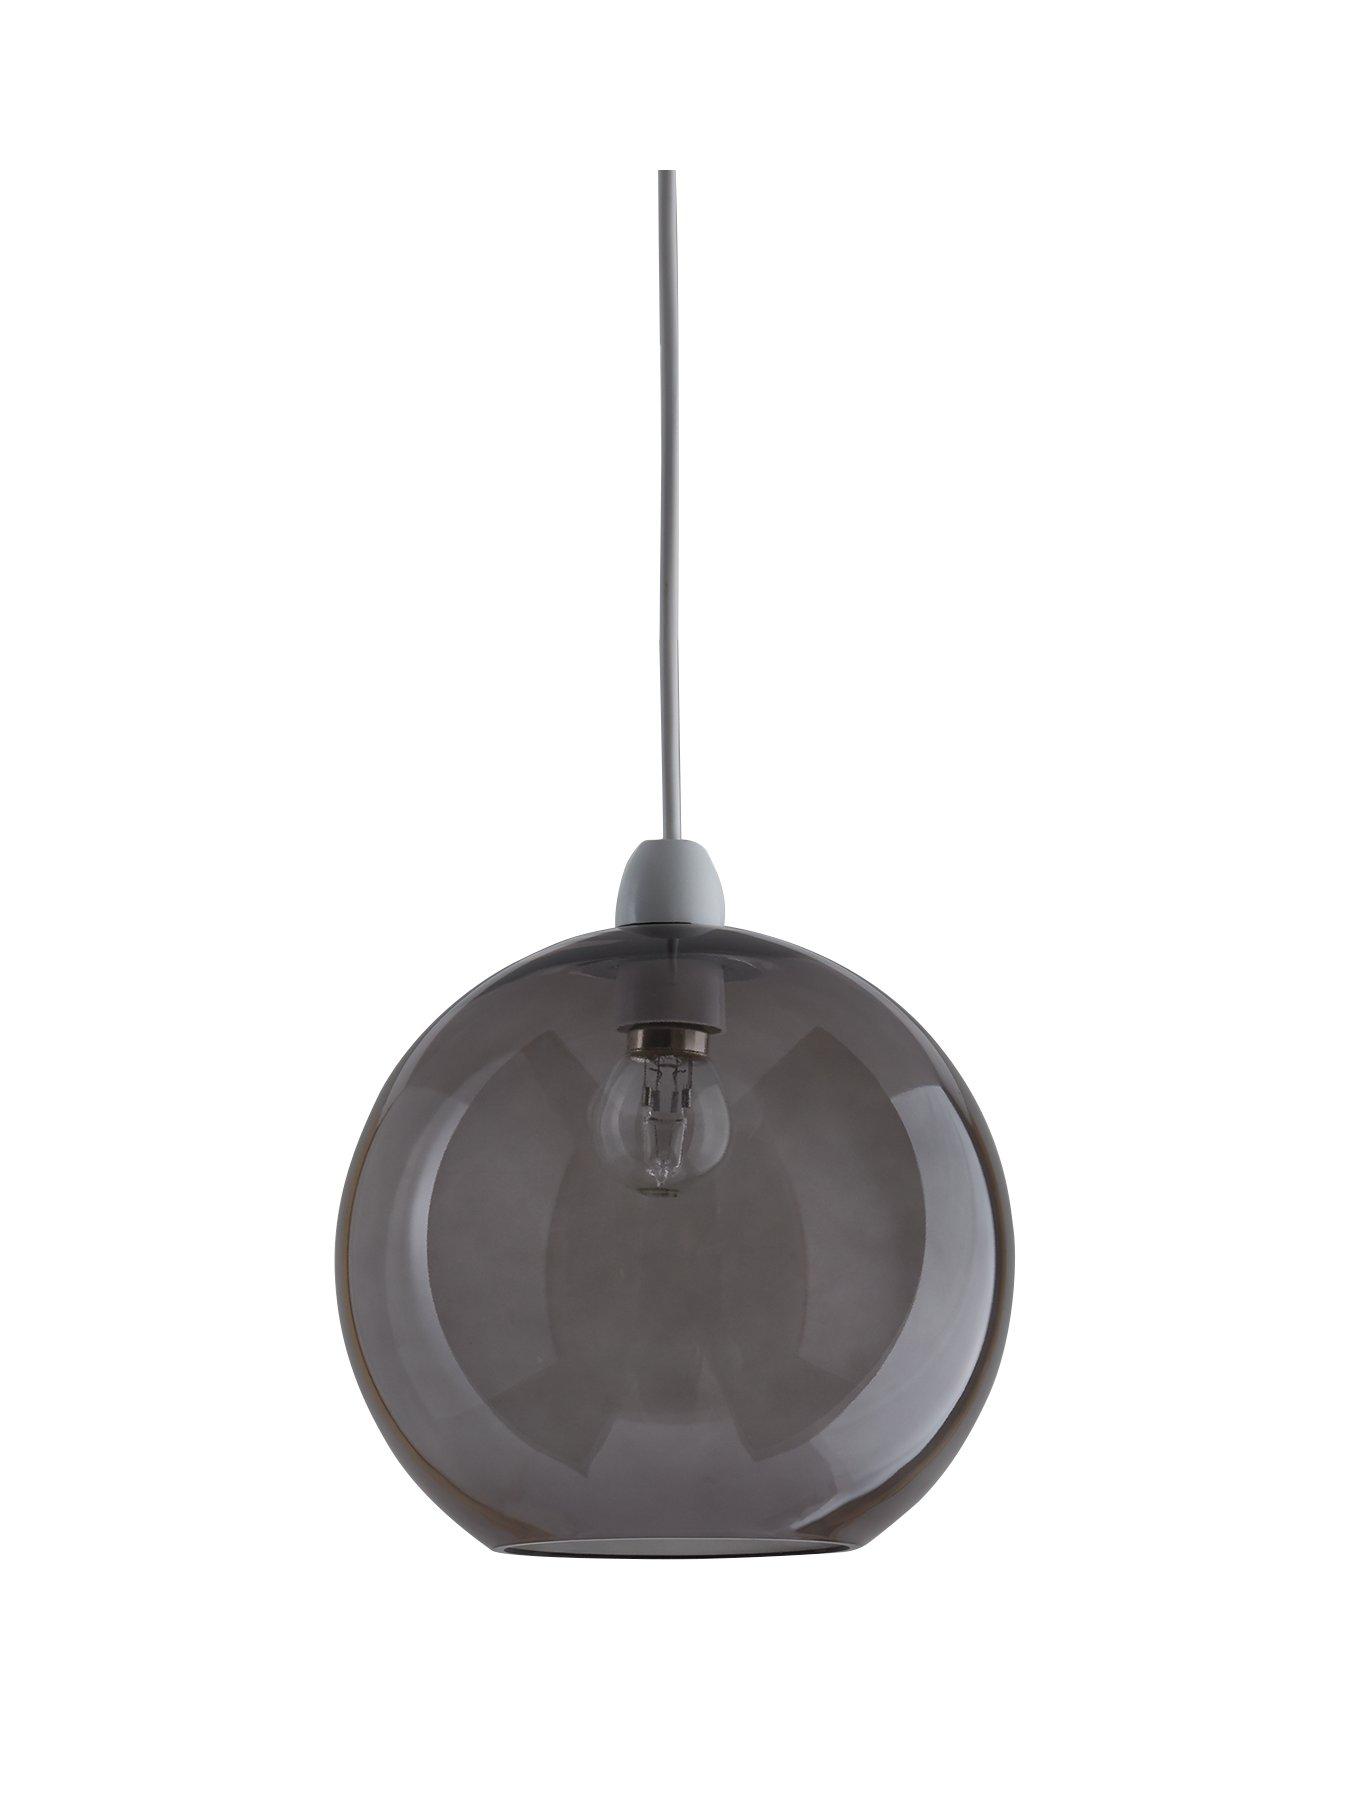 Grey Acrylic Pendant Shade for Bedroom or Living Room Smoked Grey Shade Fitting for Hallway Beautify Smoked Grey Acrylic Ceiling Light 